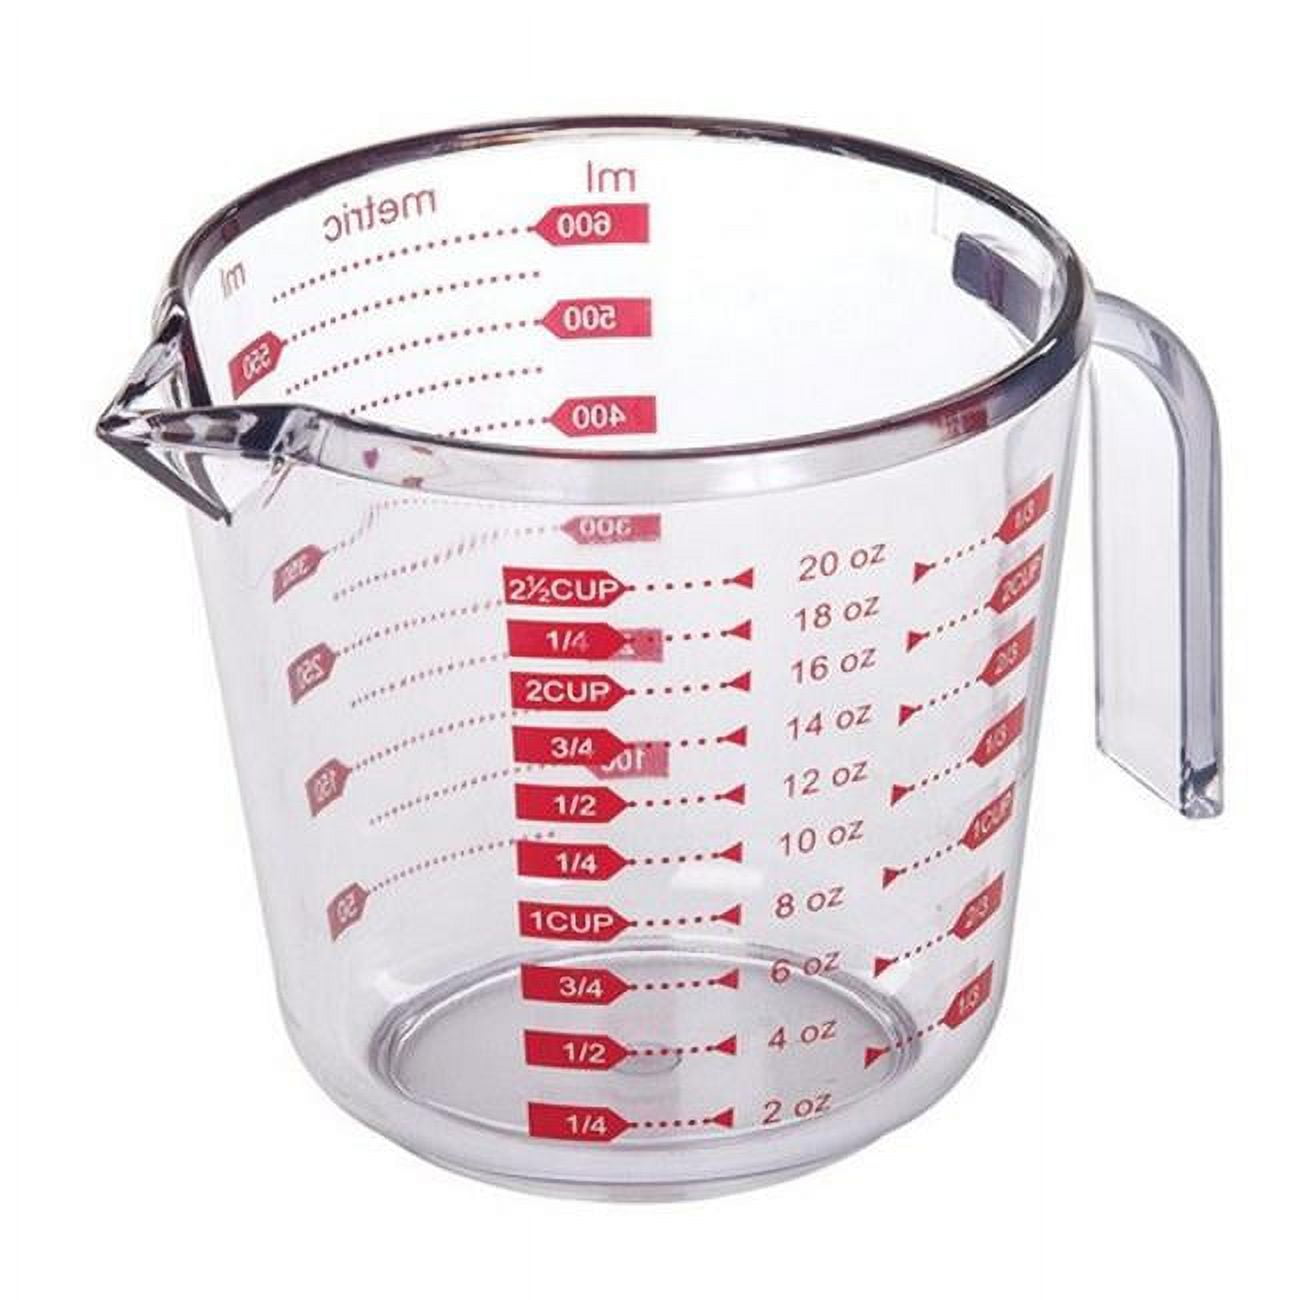  OXO Good Grips 2 Cup Adjustable Measuring Cup, Clear